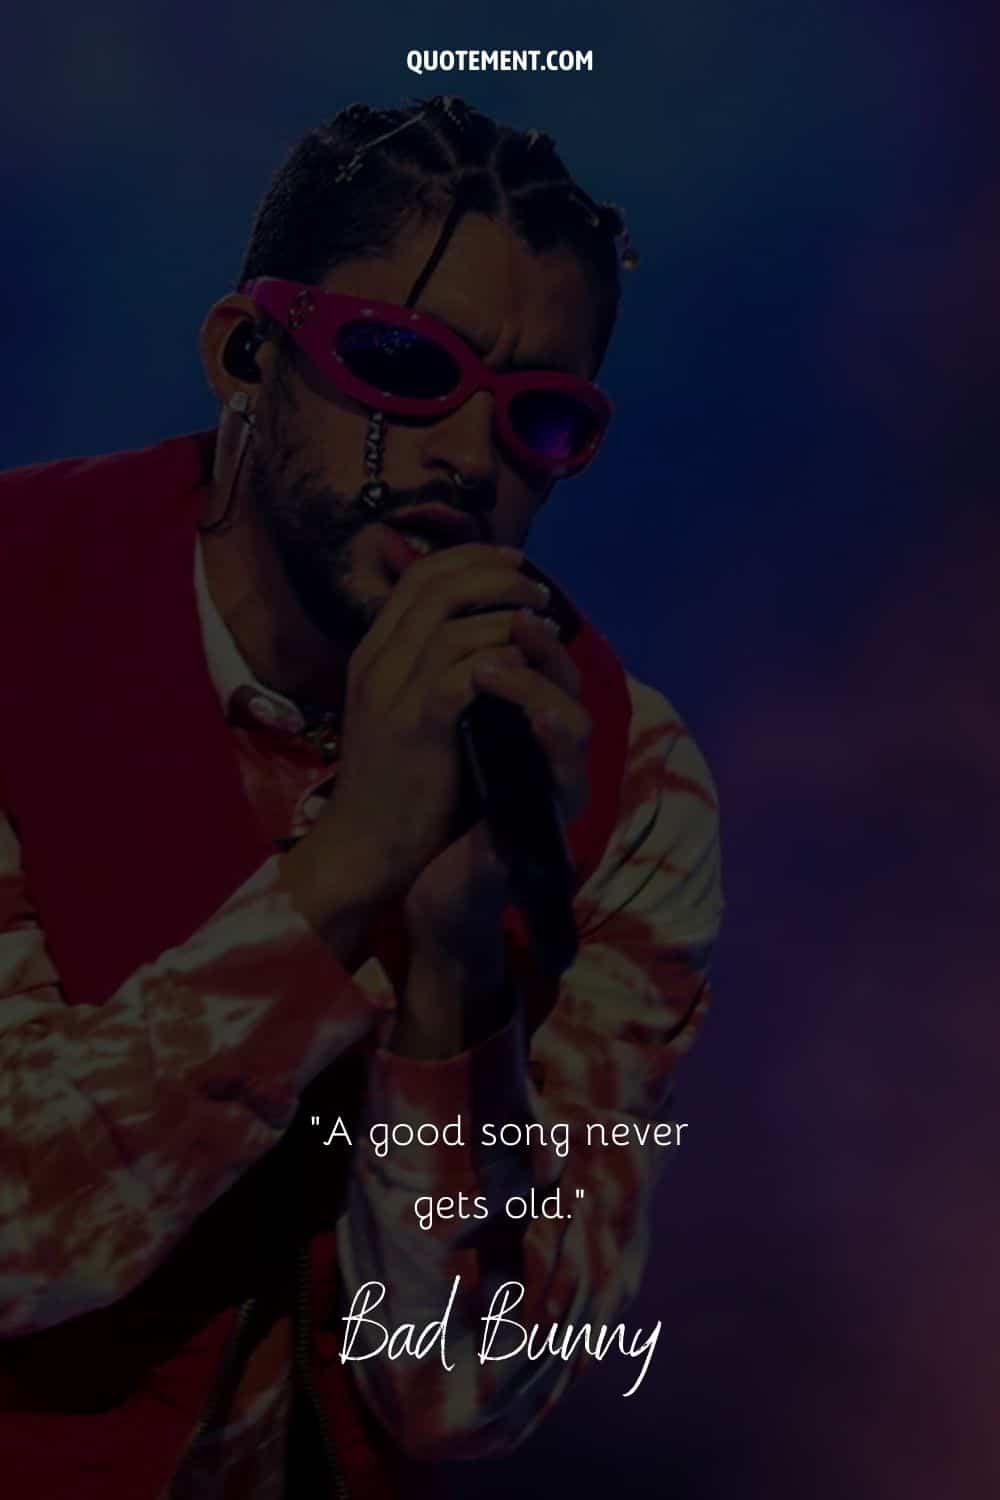 bad bunny singing on stage representing bad bunny song quote